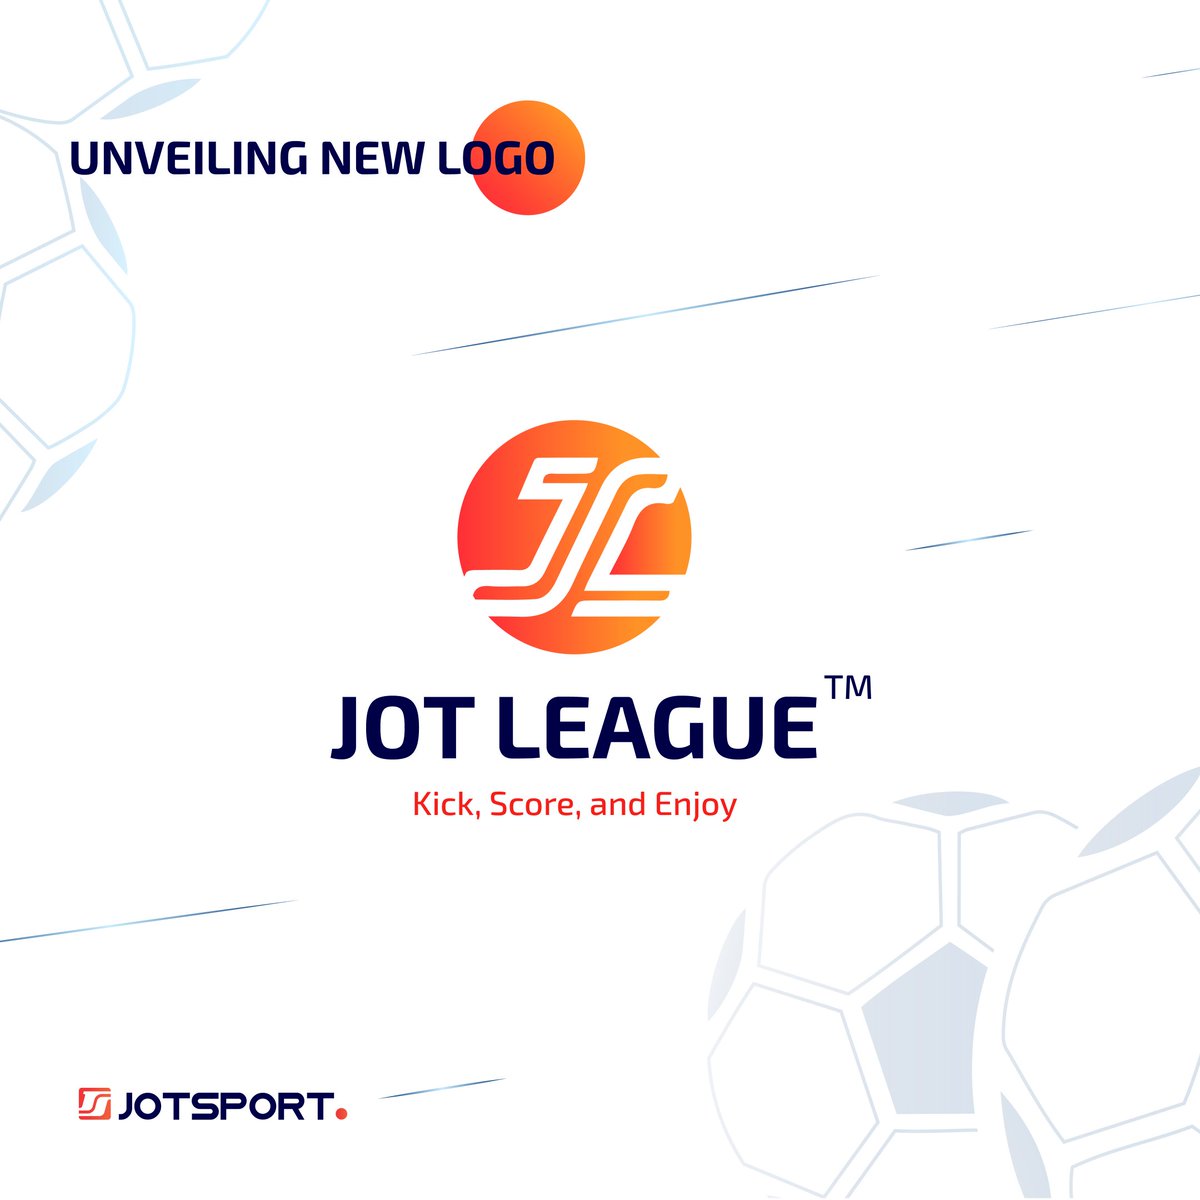 KICK, SCORE, AND ENJOY

🎉 The day we've all been waiting for is finally here– it's D-Day for the big reveal! 🚀⚽ Get ready to witness the game-changing swagger of the new @Jot_League logo! Let the football fiesta begin! 🔥 
#Jotsport
#JOTLeague #NewLogoReveal #GameDayExcitement